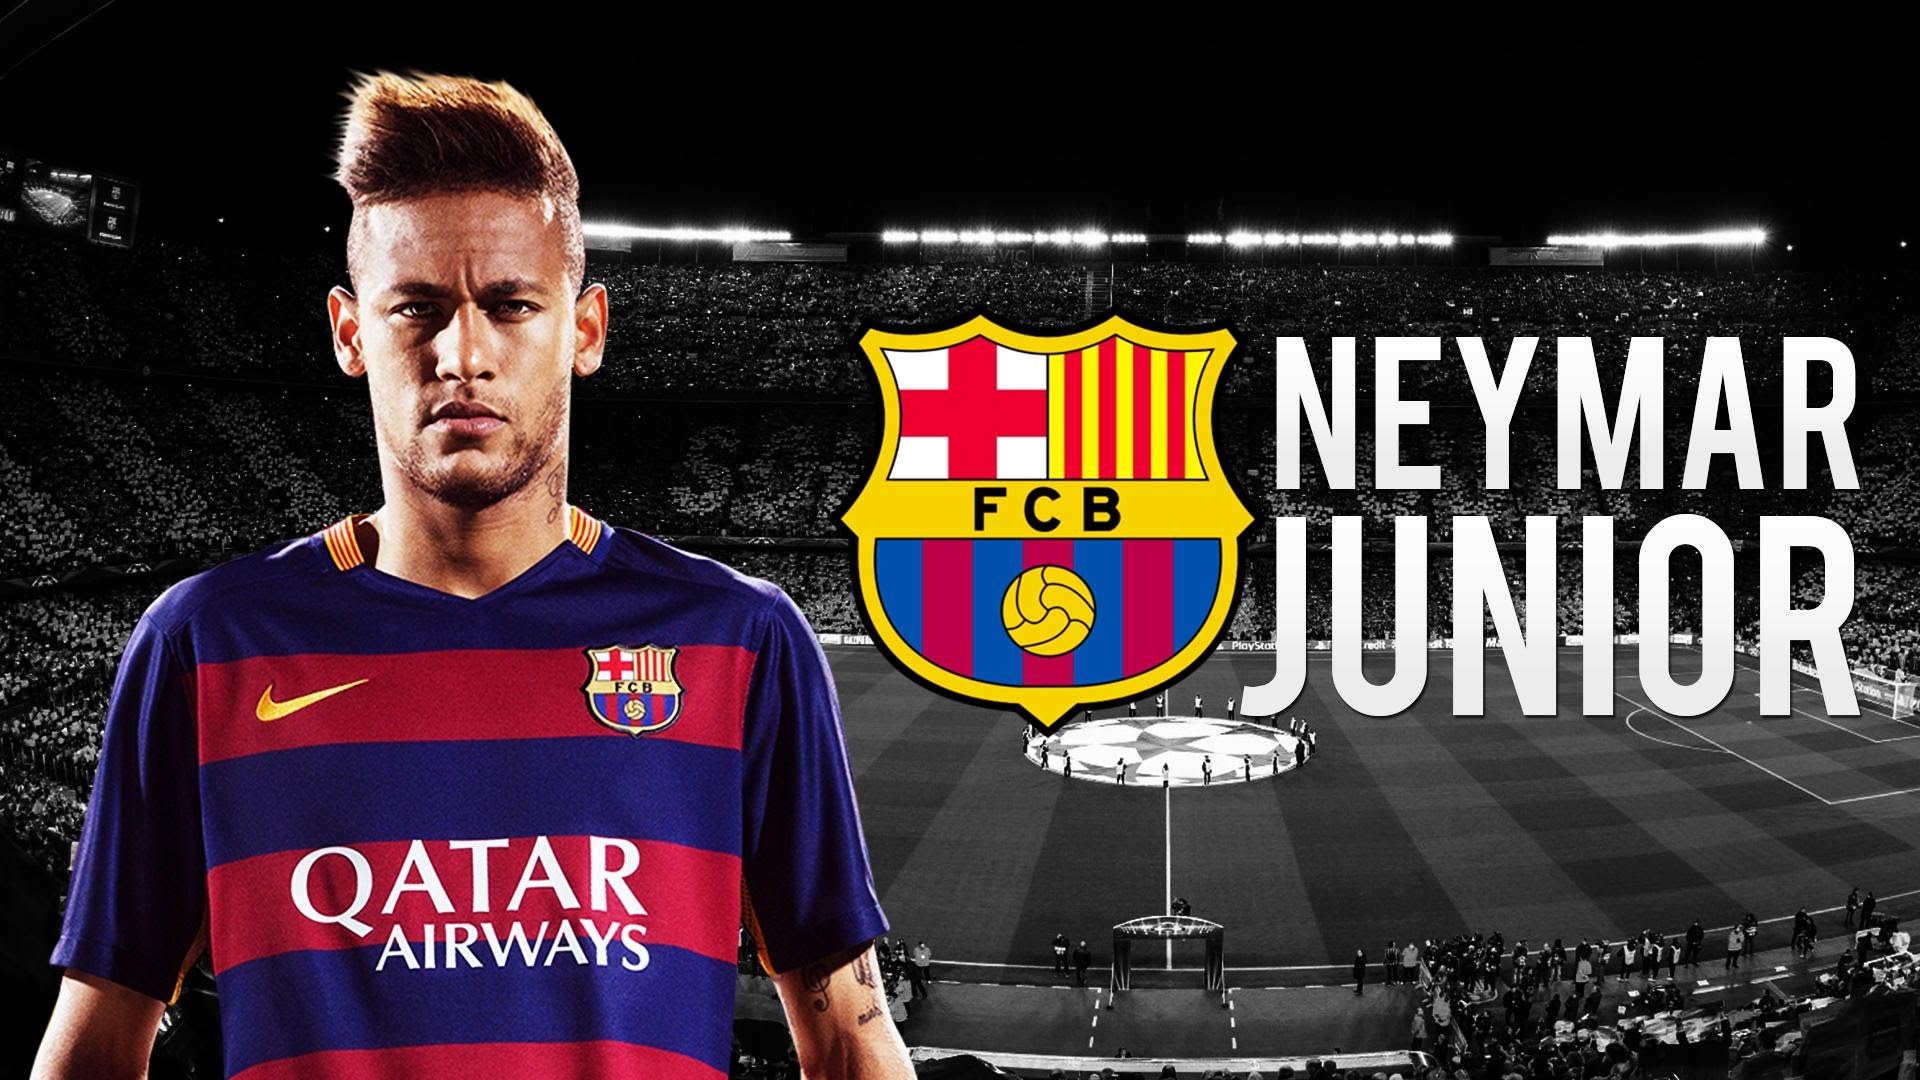 1920x1080 Neymar 2016 Wallpaper HD - HD Wallpapers Backgrounds of Your Choice